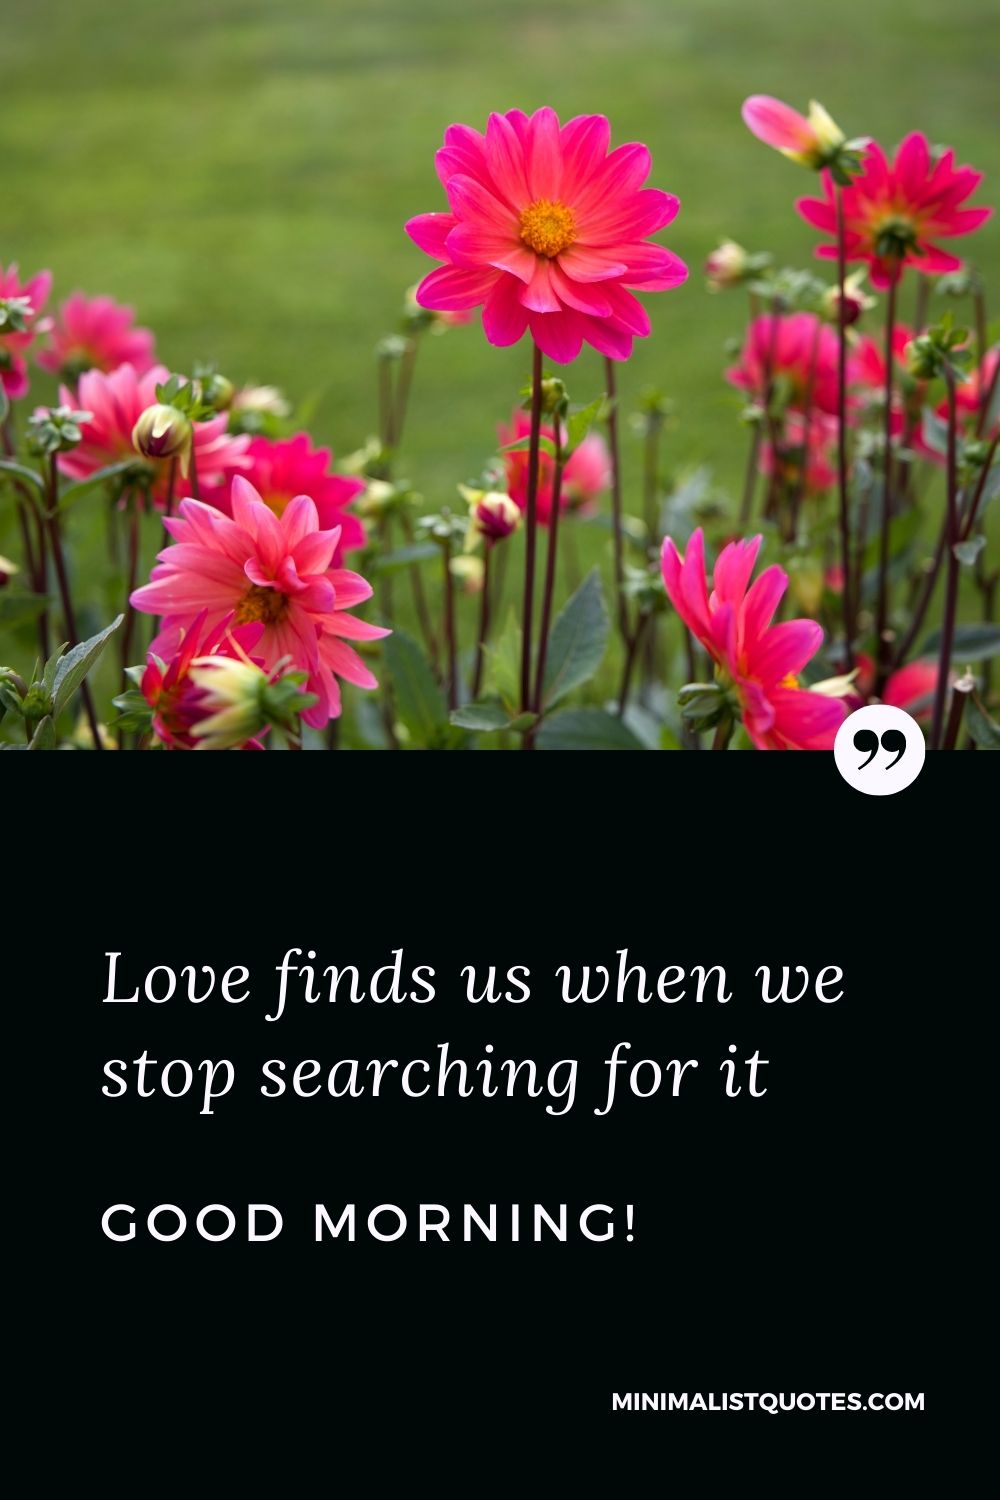 Morning Quote, Wish & Message With Image: Love finds us when we stop searching for it. Good Morning!